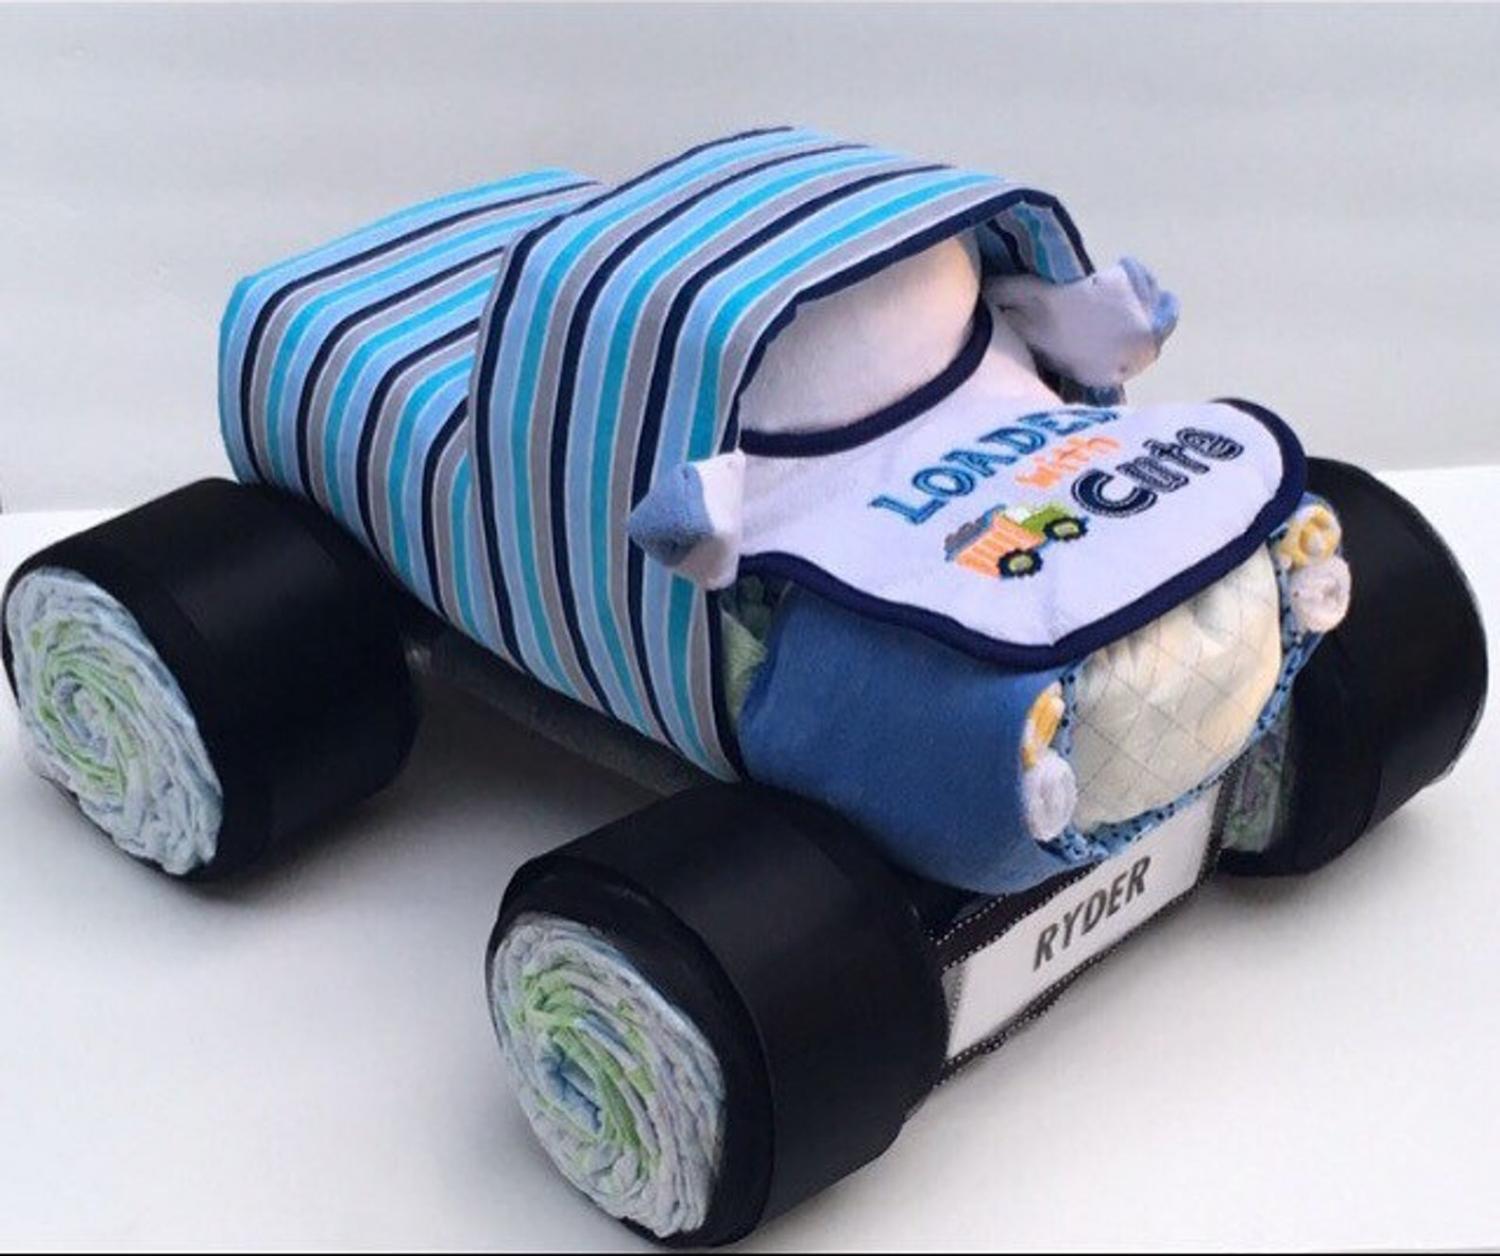 Trucks and Tractors Made From Diapers Make For The Cutest Gift To New Parents - Best baby shower diaper gift idea